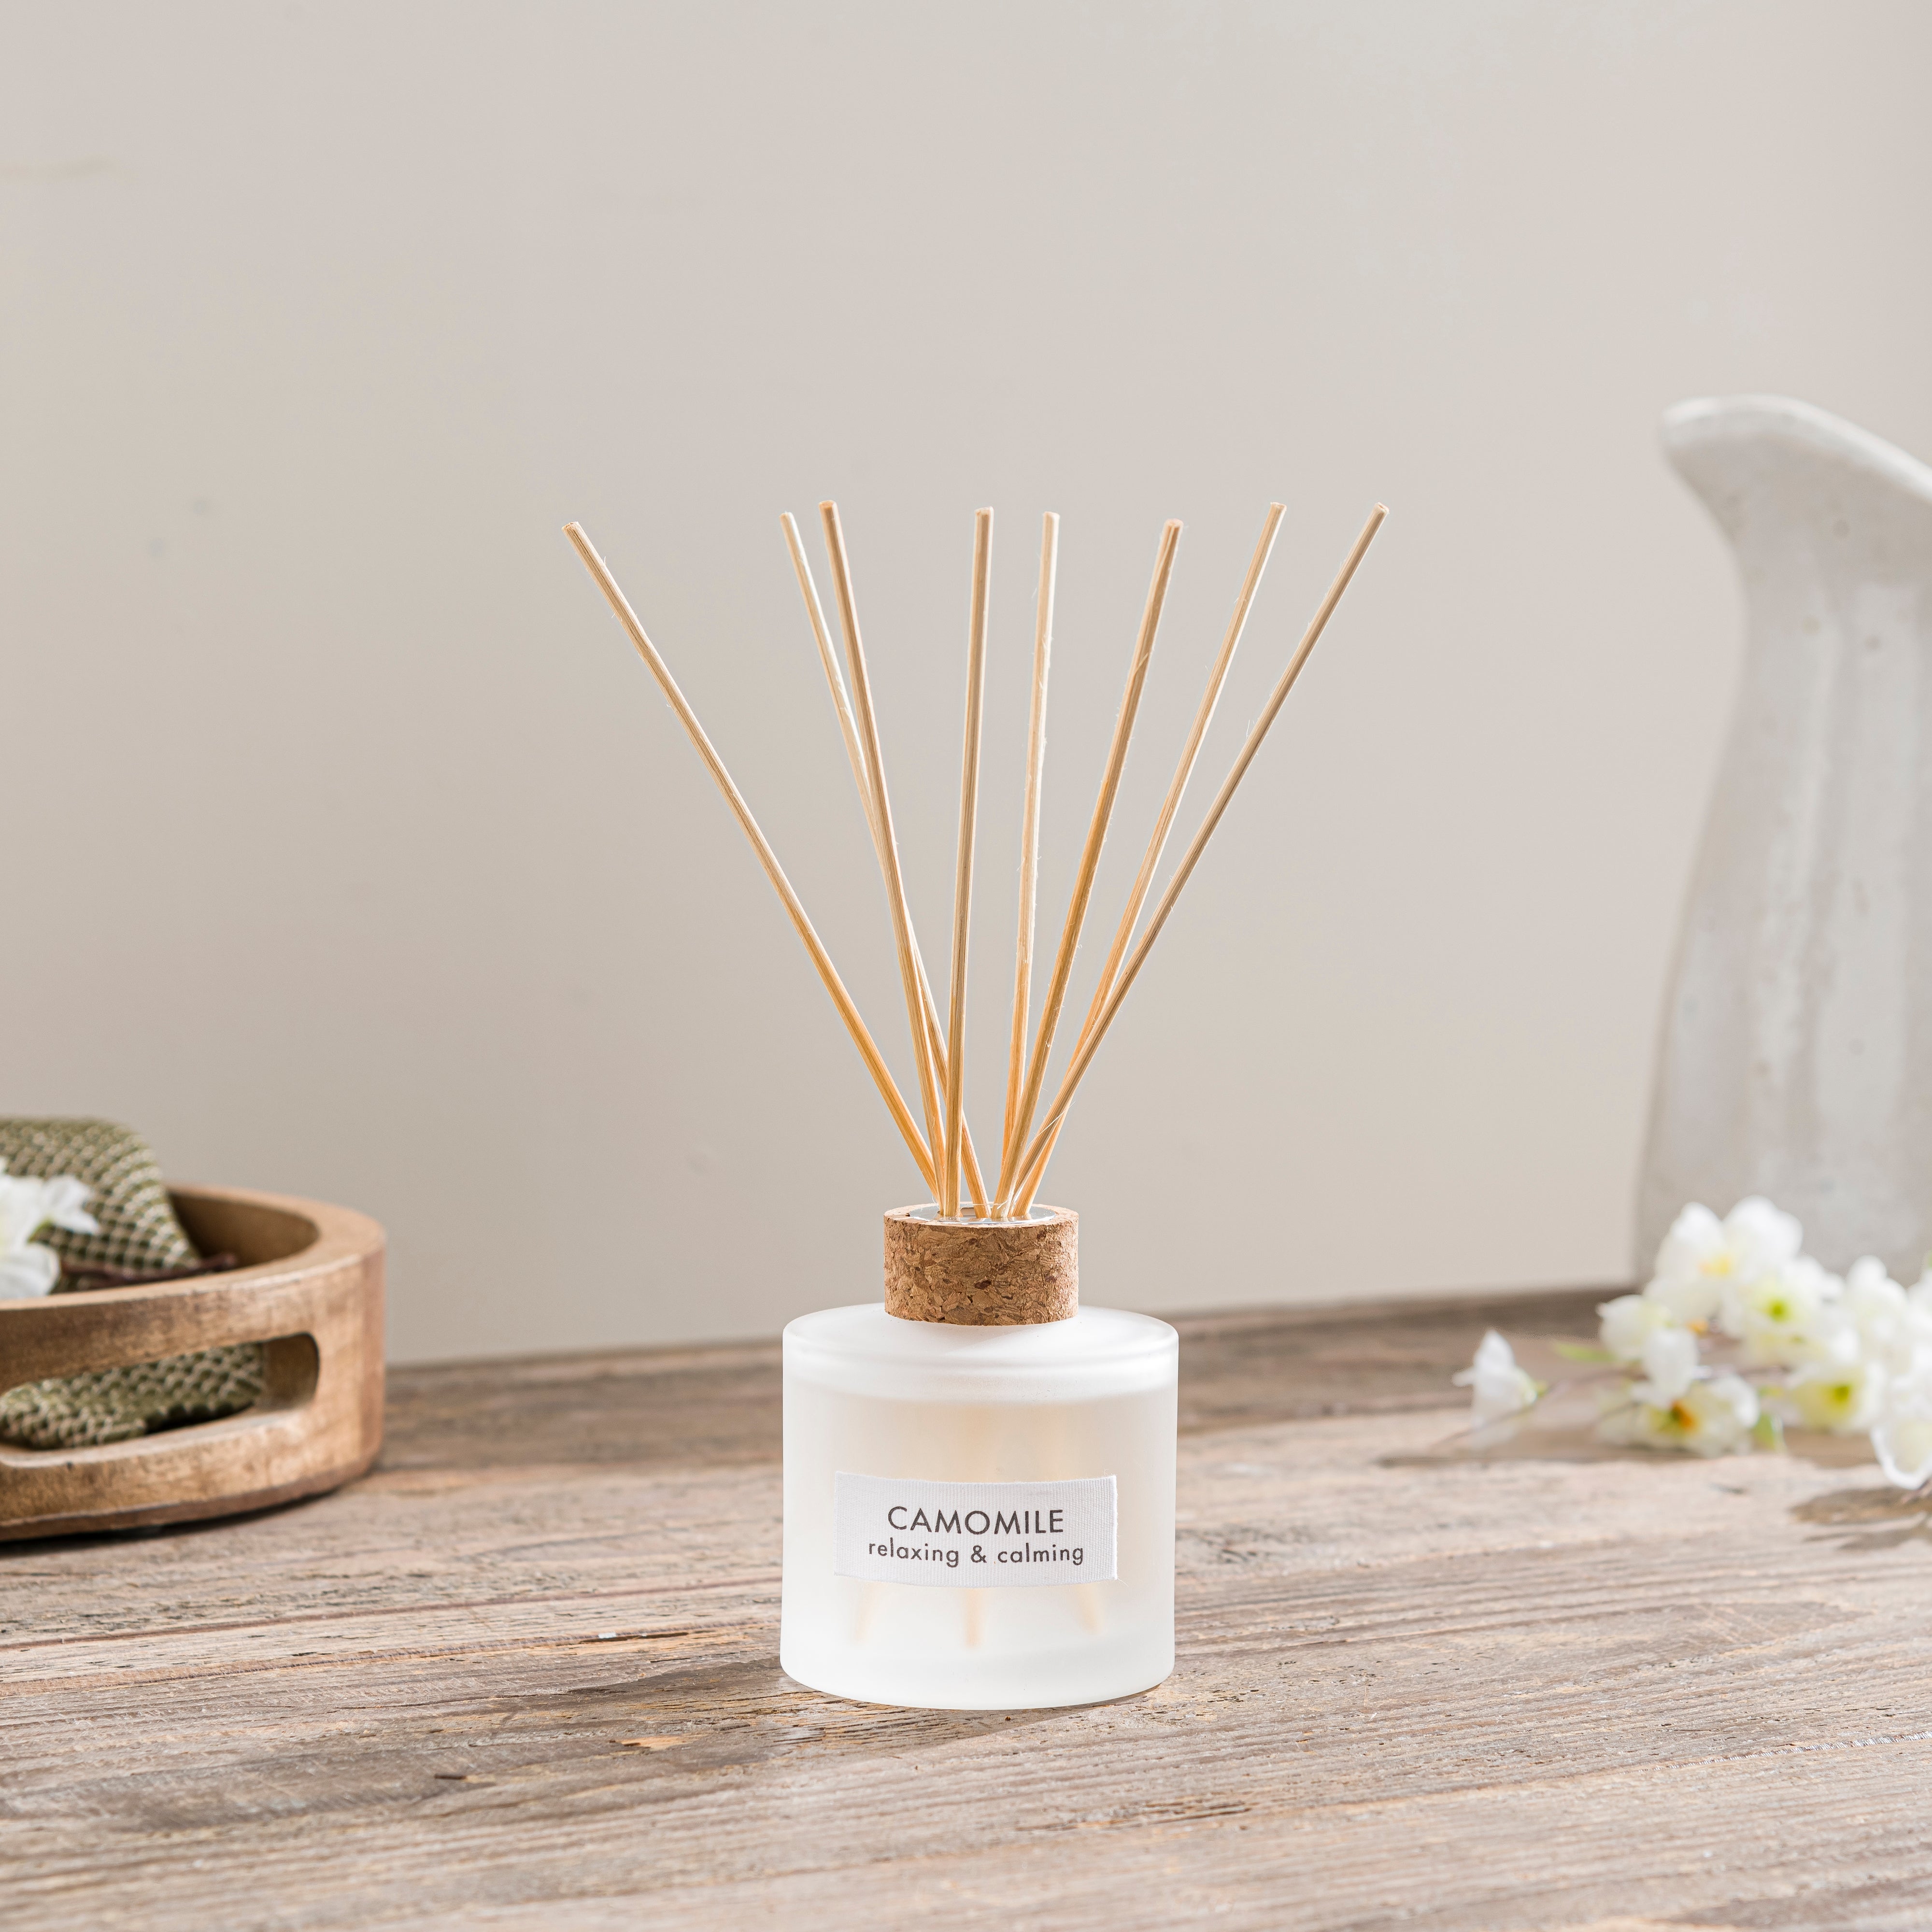 Camomile Candle & Diffuser Gift Collection Set